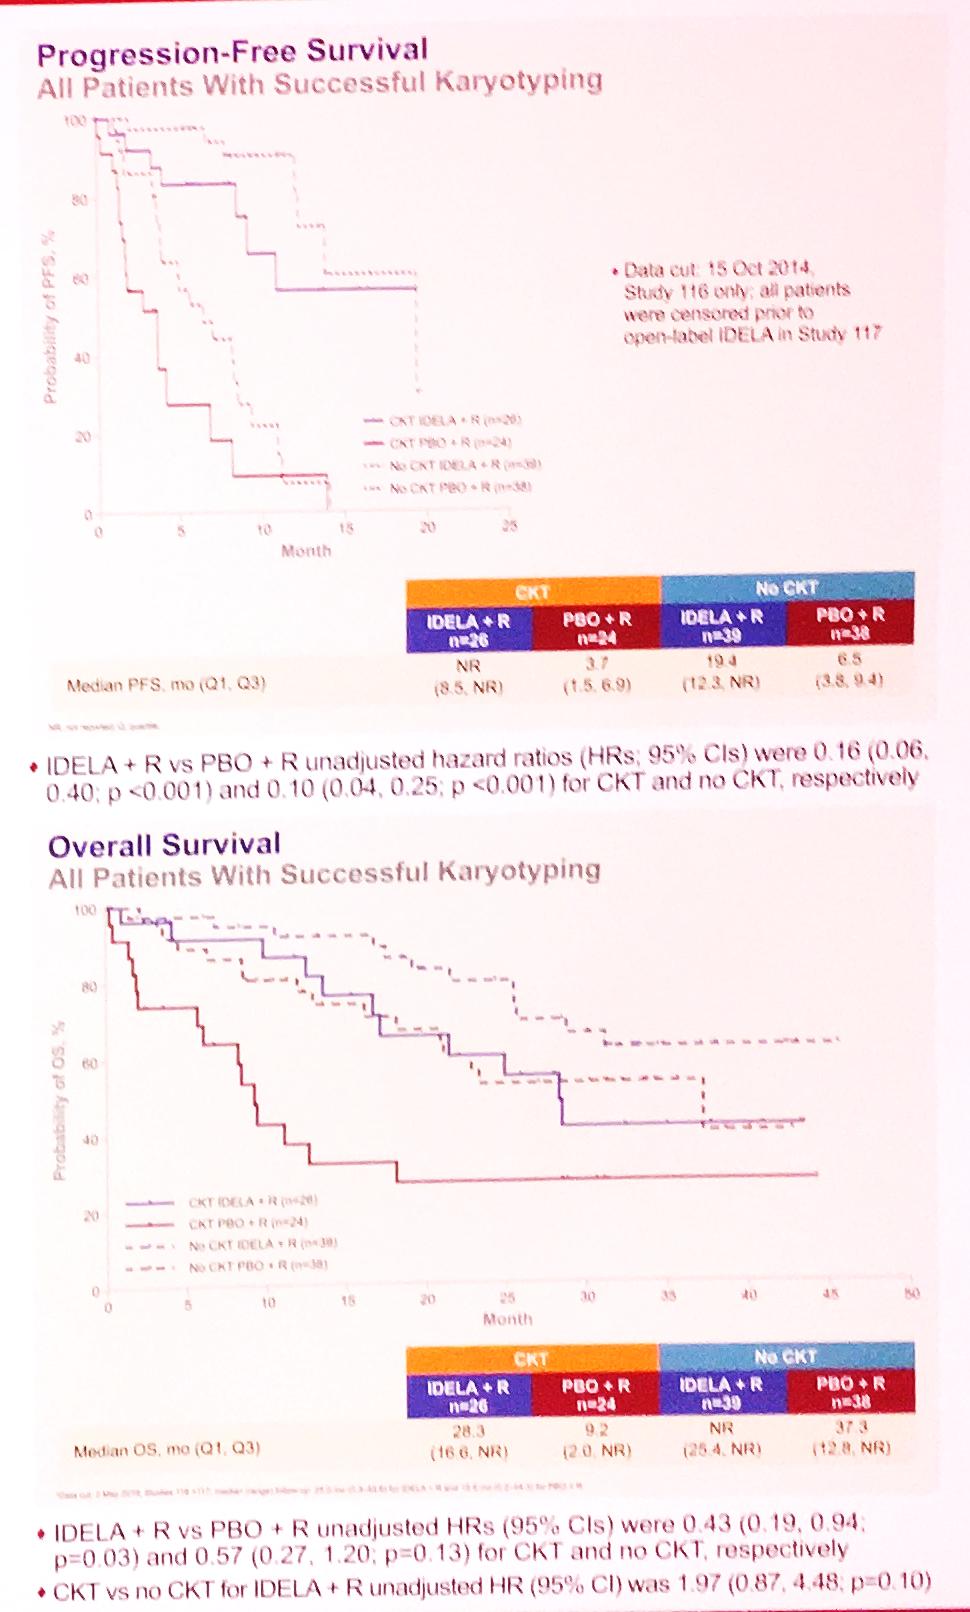 PFS NR Pa-ents with Complex Karyotype (CK) treated with Idela+R Retrospec7ve exploratory analysis of Study 1116 (Idelal+R vs R) Update on the OS data at ASH 2016 Now with median FU 25